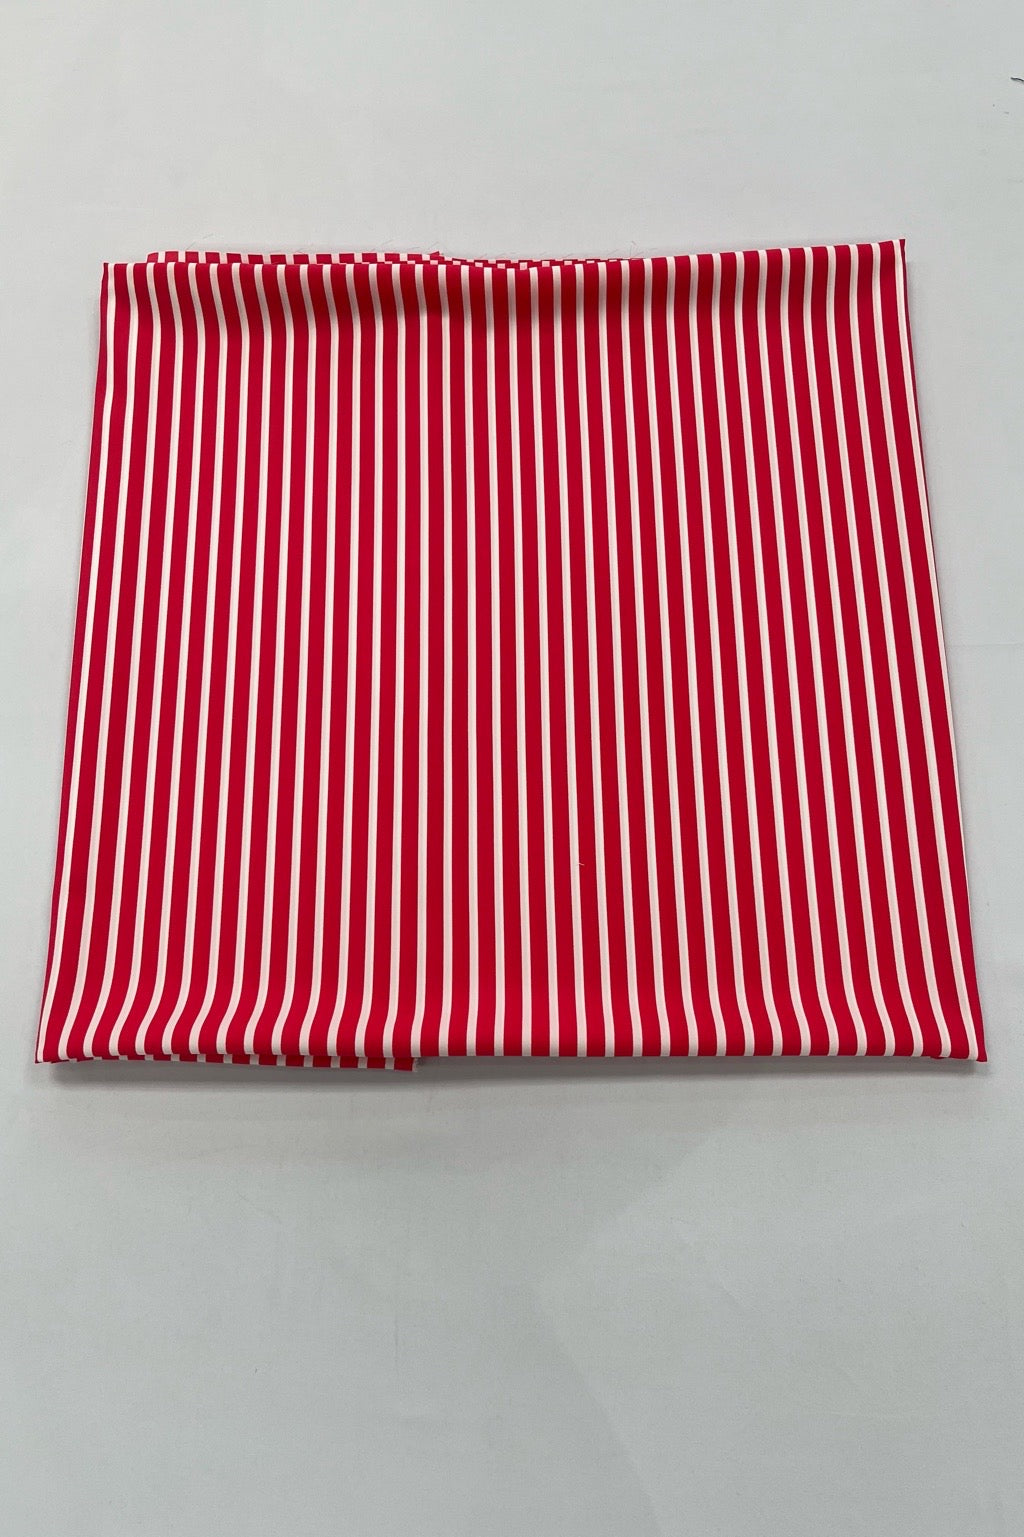 Unstitched Pink With White Stripes Polyester Fabric (4 metres)